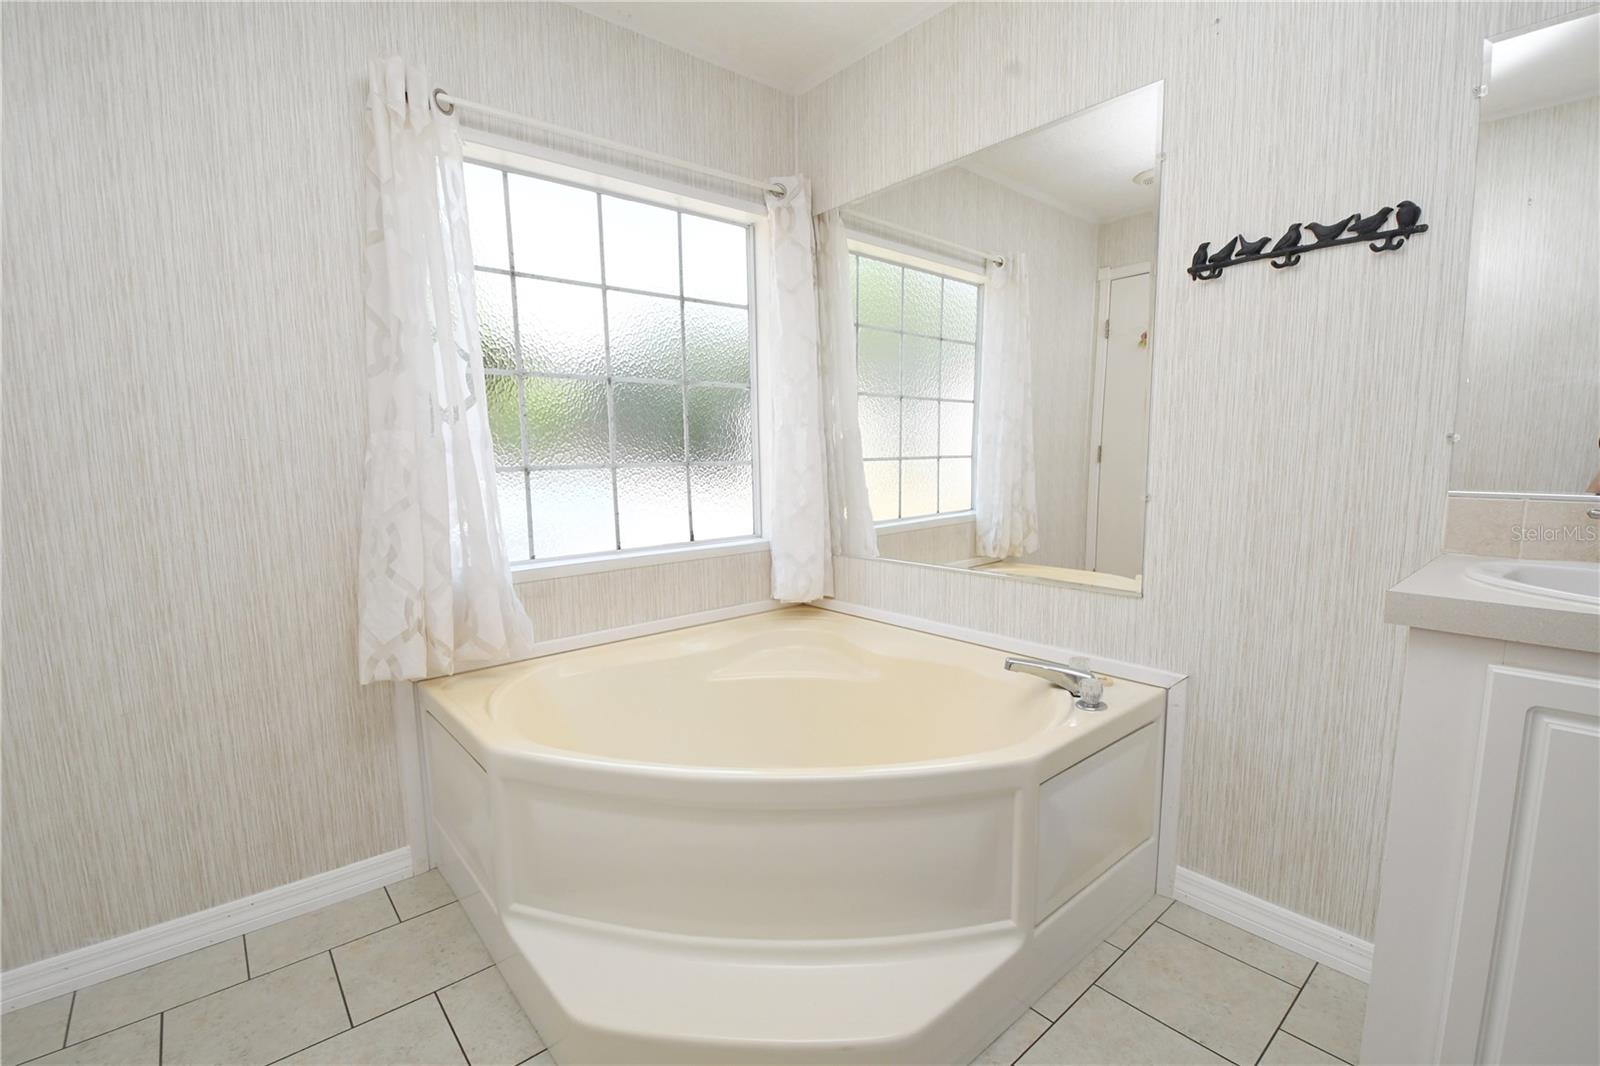 The master bath features a garden tub beneath a frosted window for additional privacy.